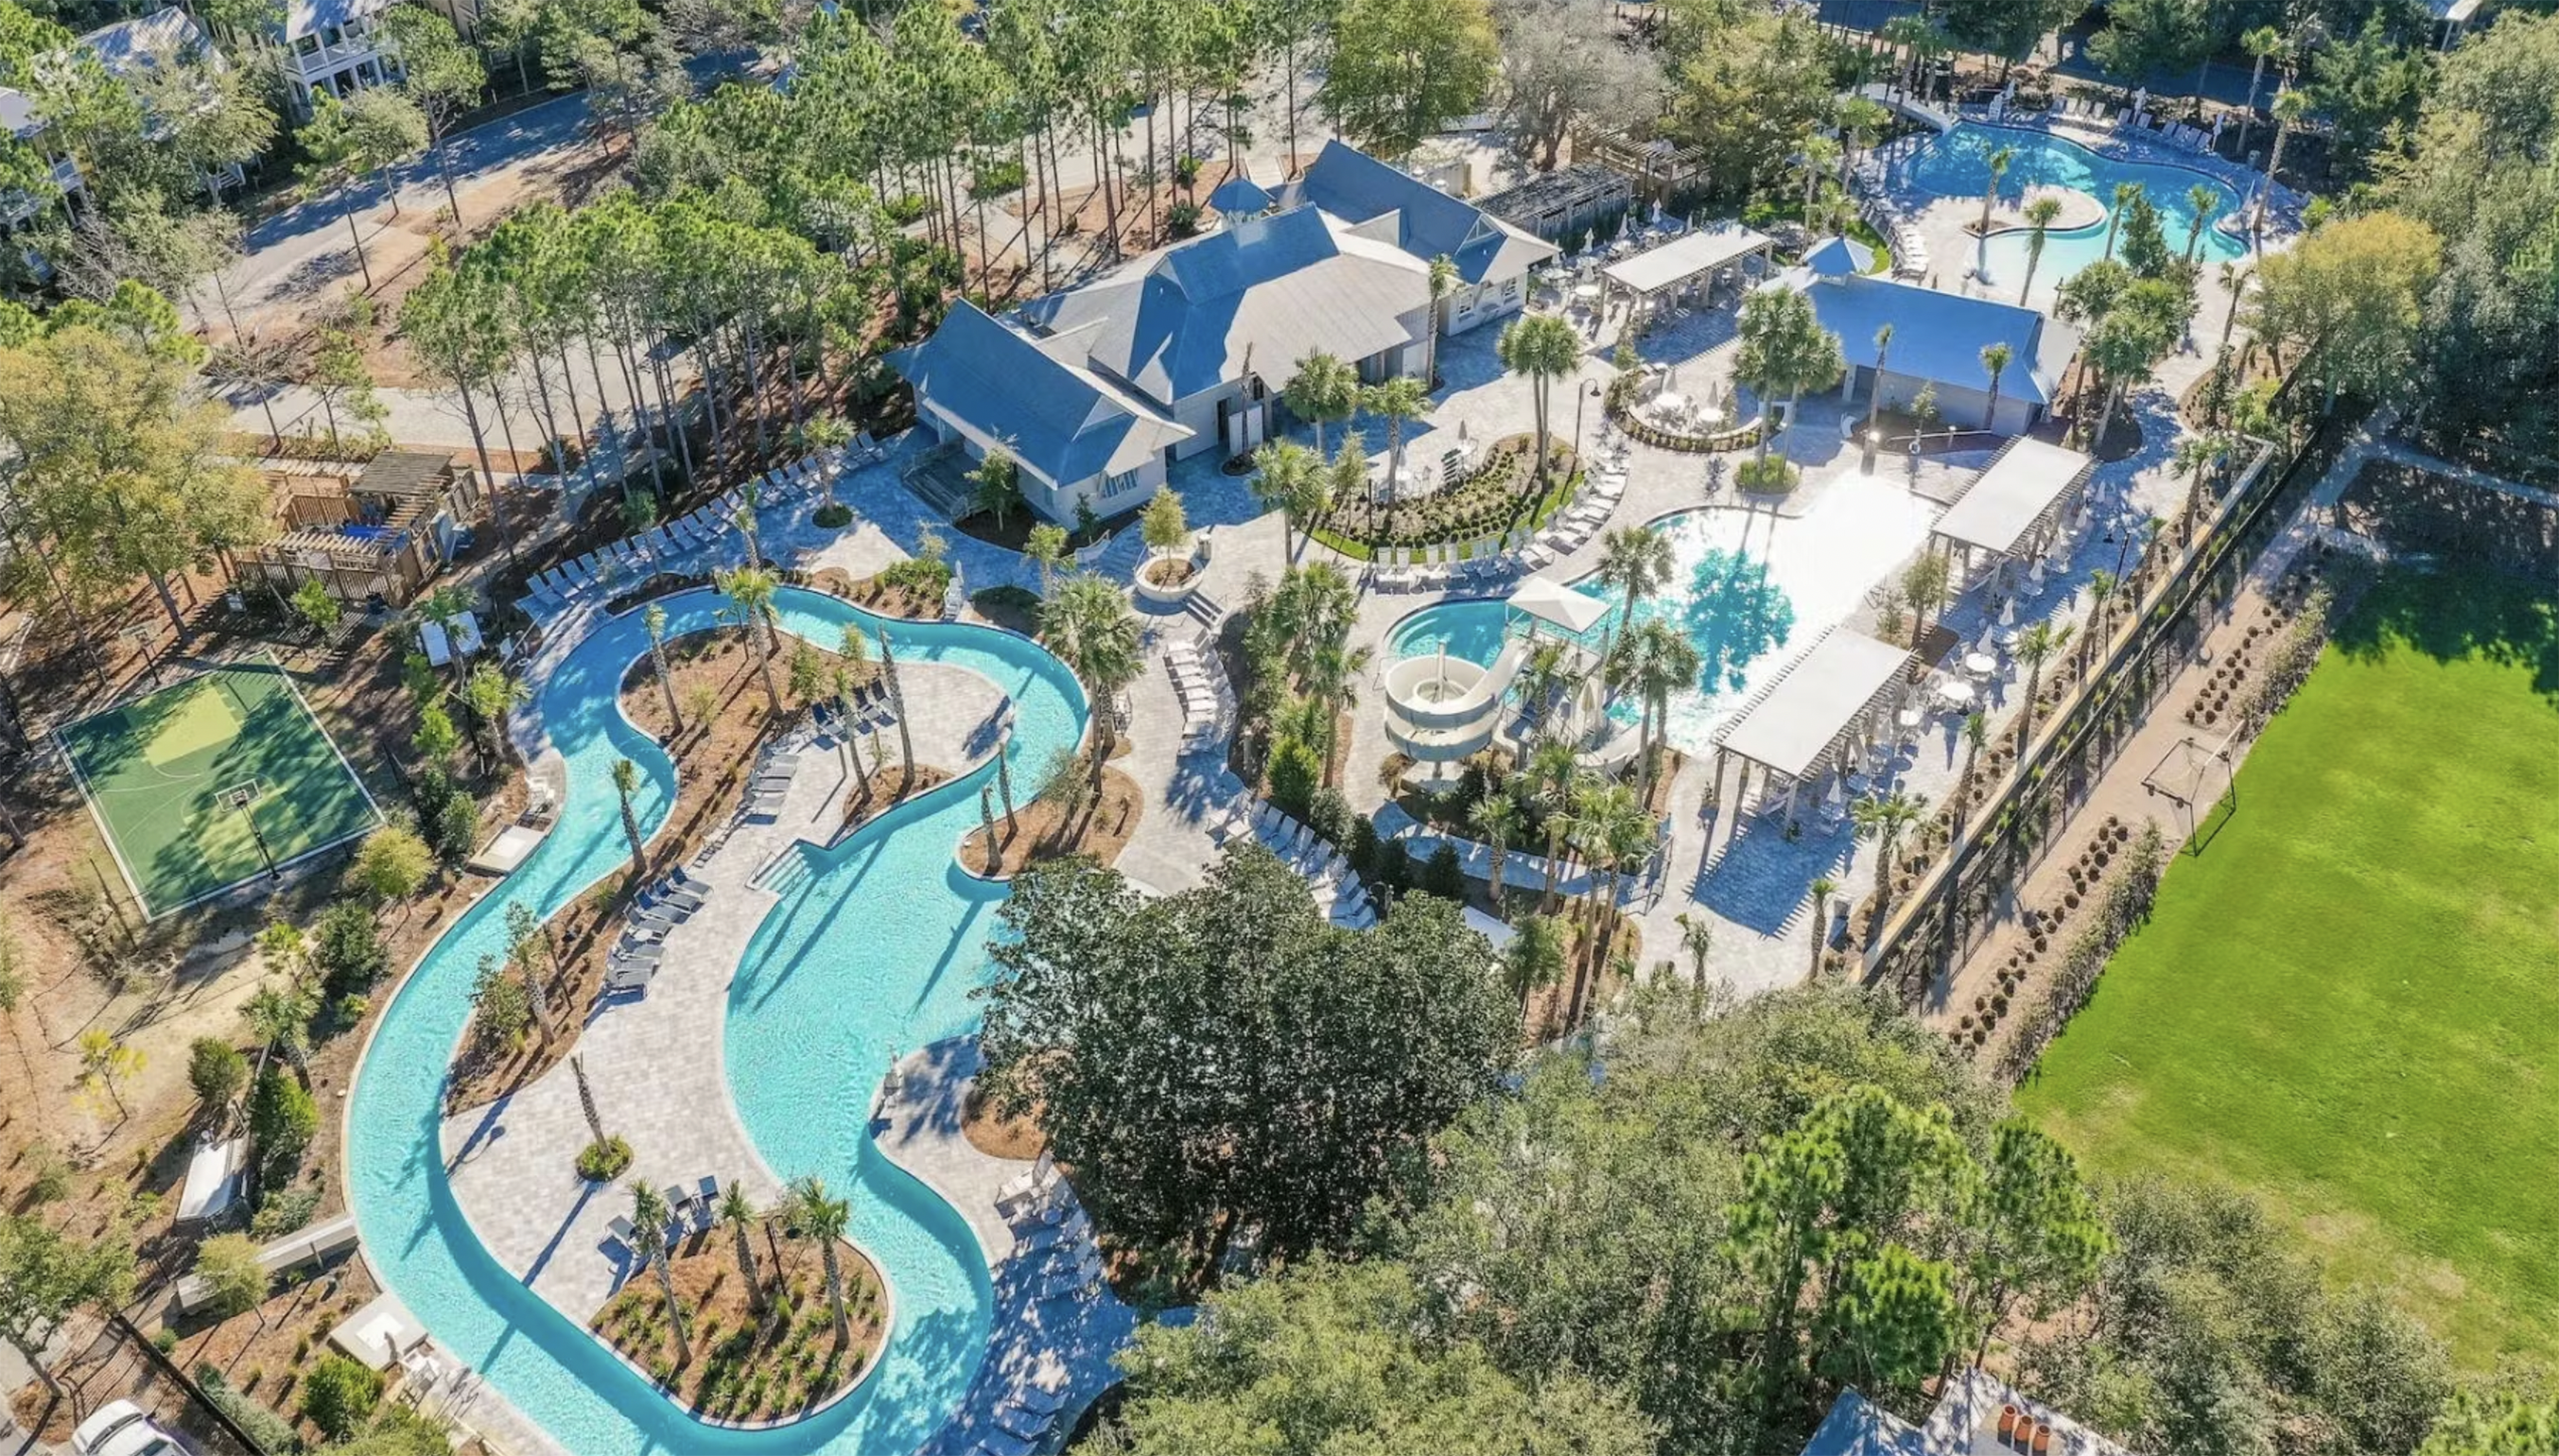 Aerial view of Water color pools and slides